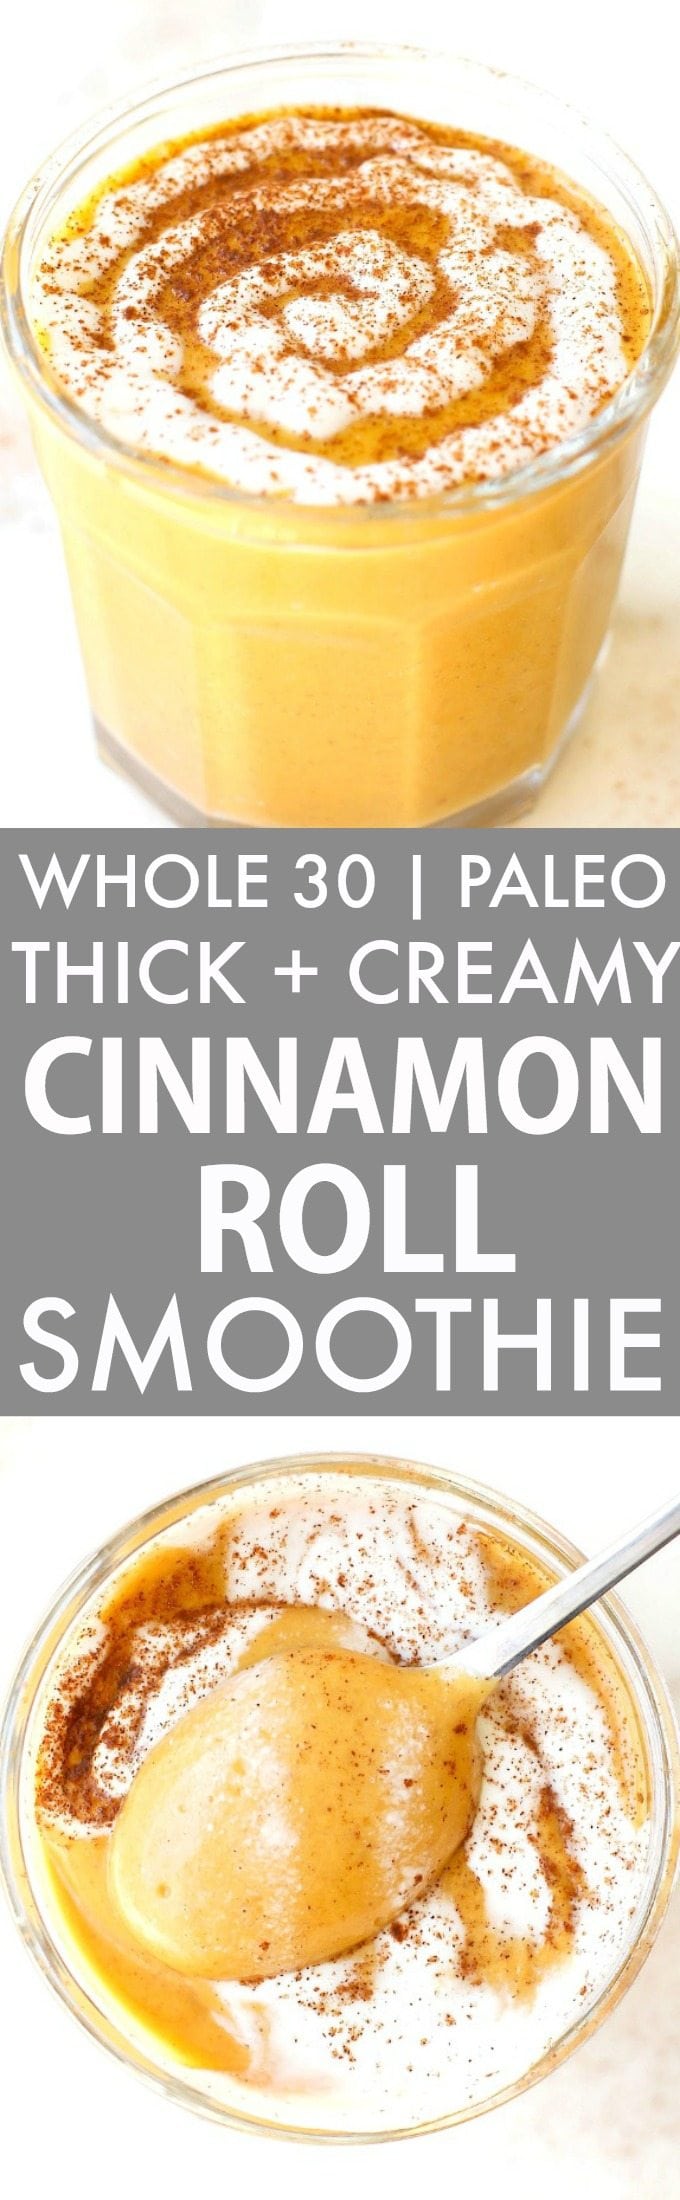 Thick and Creamy Cinnamon Roll Smoothie (Whole 30, Paleo, V, GF)- Healthy, Wholesome, hearty and EASY, this thick and creamy smoothie is JUST like a cinnamon roll- Cozy, comforting and keeps you satisfied and filling! Enjoy hot or cold! {whole30, paleo, vegan, gluten free recipe}- thebigmansworld.com